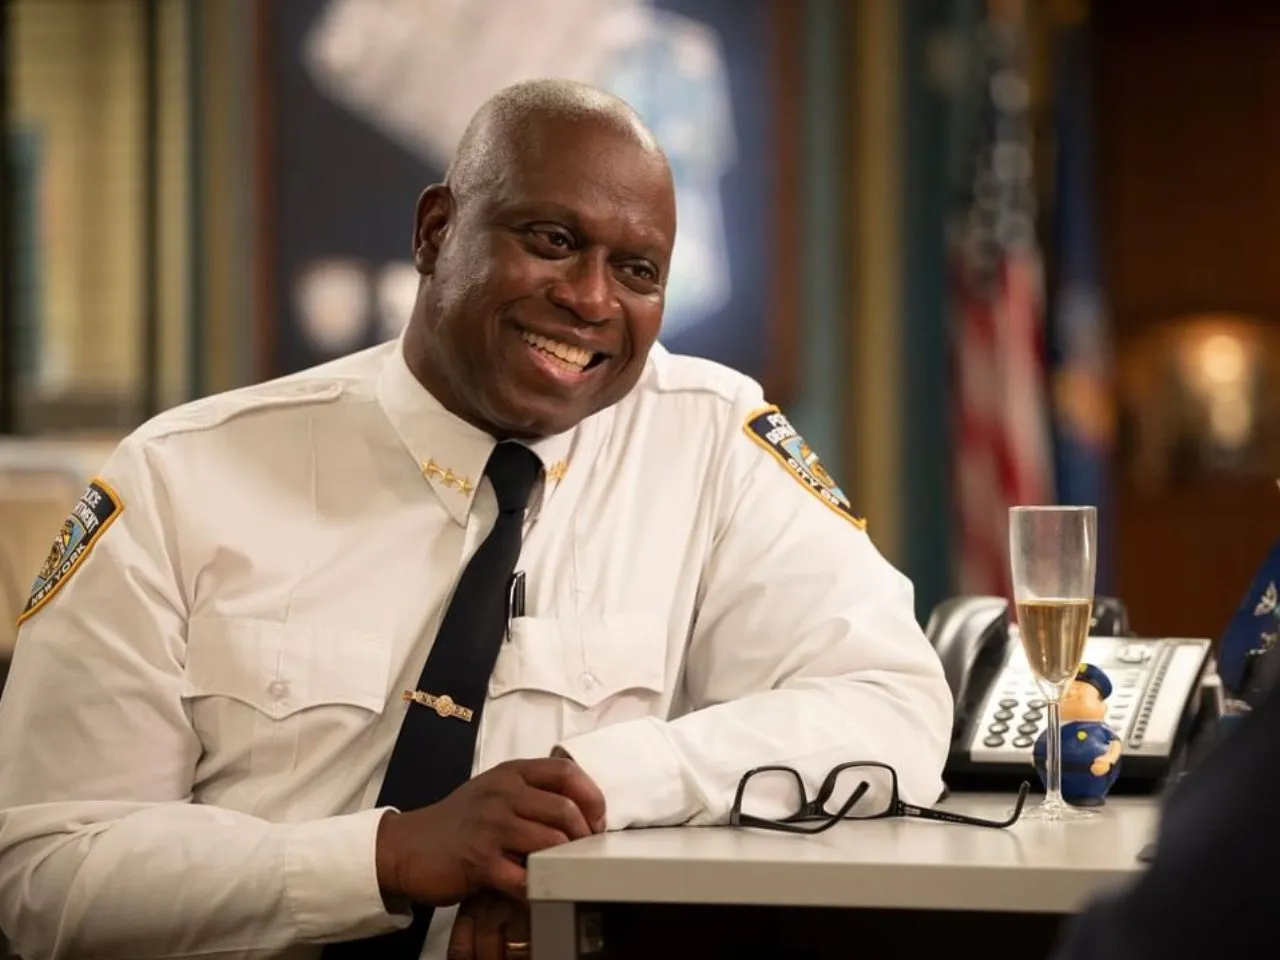 RIP Captain Holt: Not just Jake Peralta, today we lost a parent too